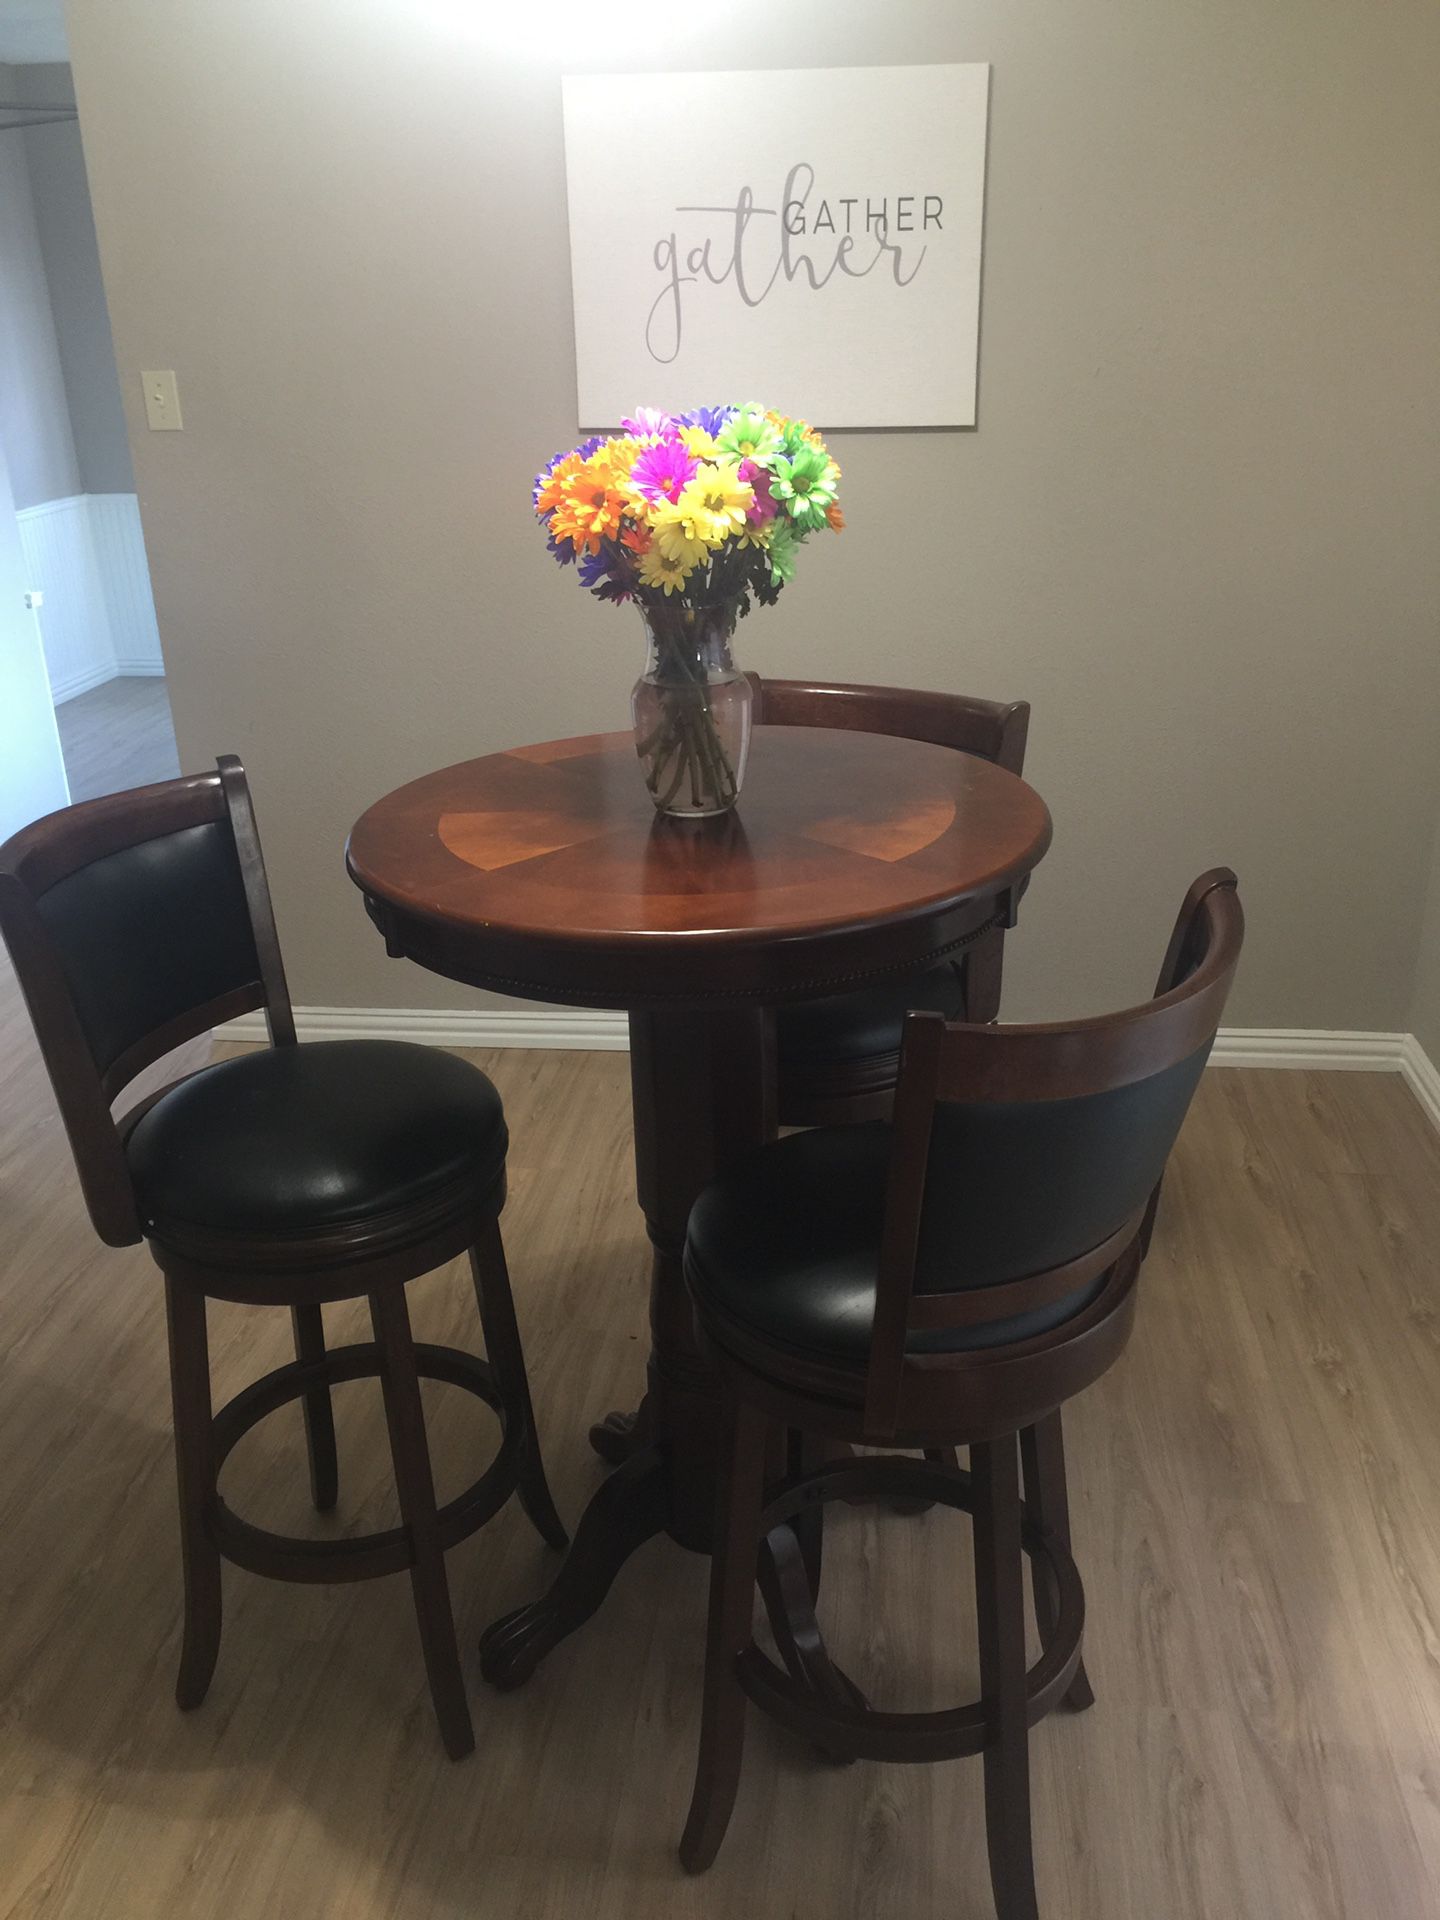 Dining room table with 3 chairs $75